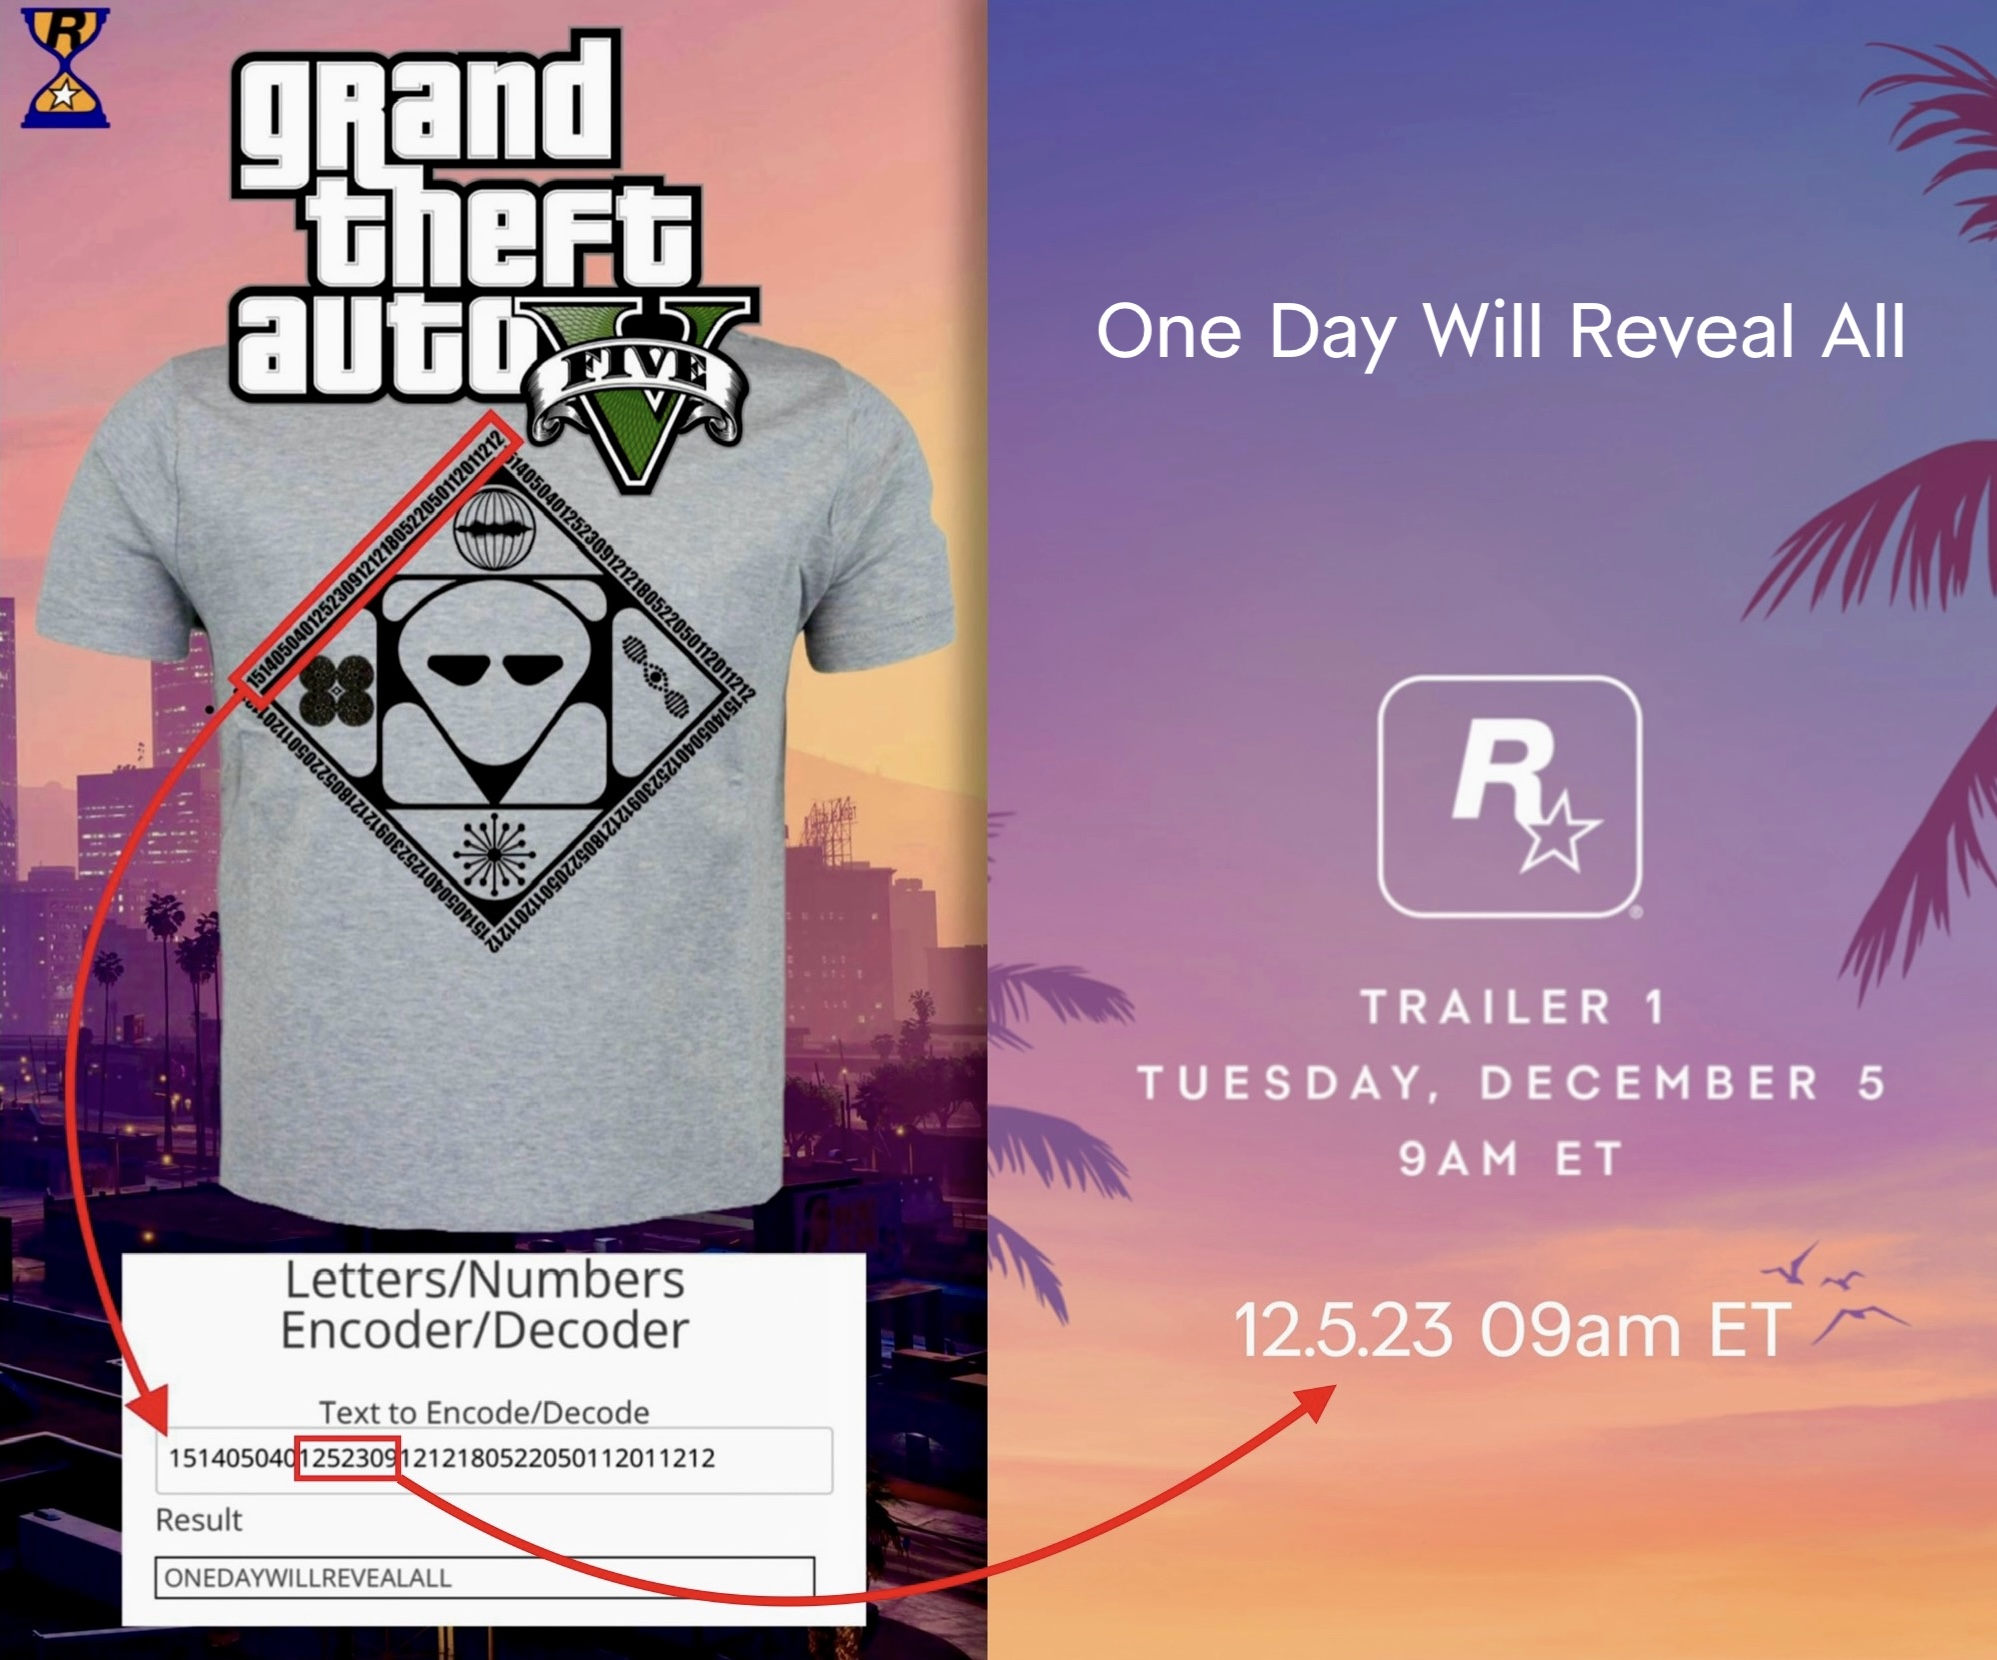 GTA 6 Trailer Countdown ⏳ on X: .@CommunityNotes, the post doesn't imply  or mention that it was posted by Rockstar, it's only official because  Metacritic has to manually verify a game before